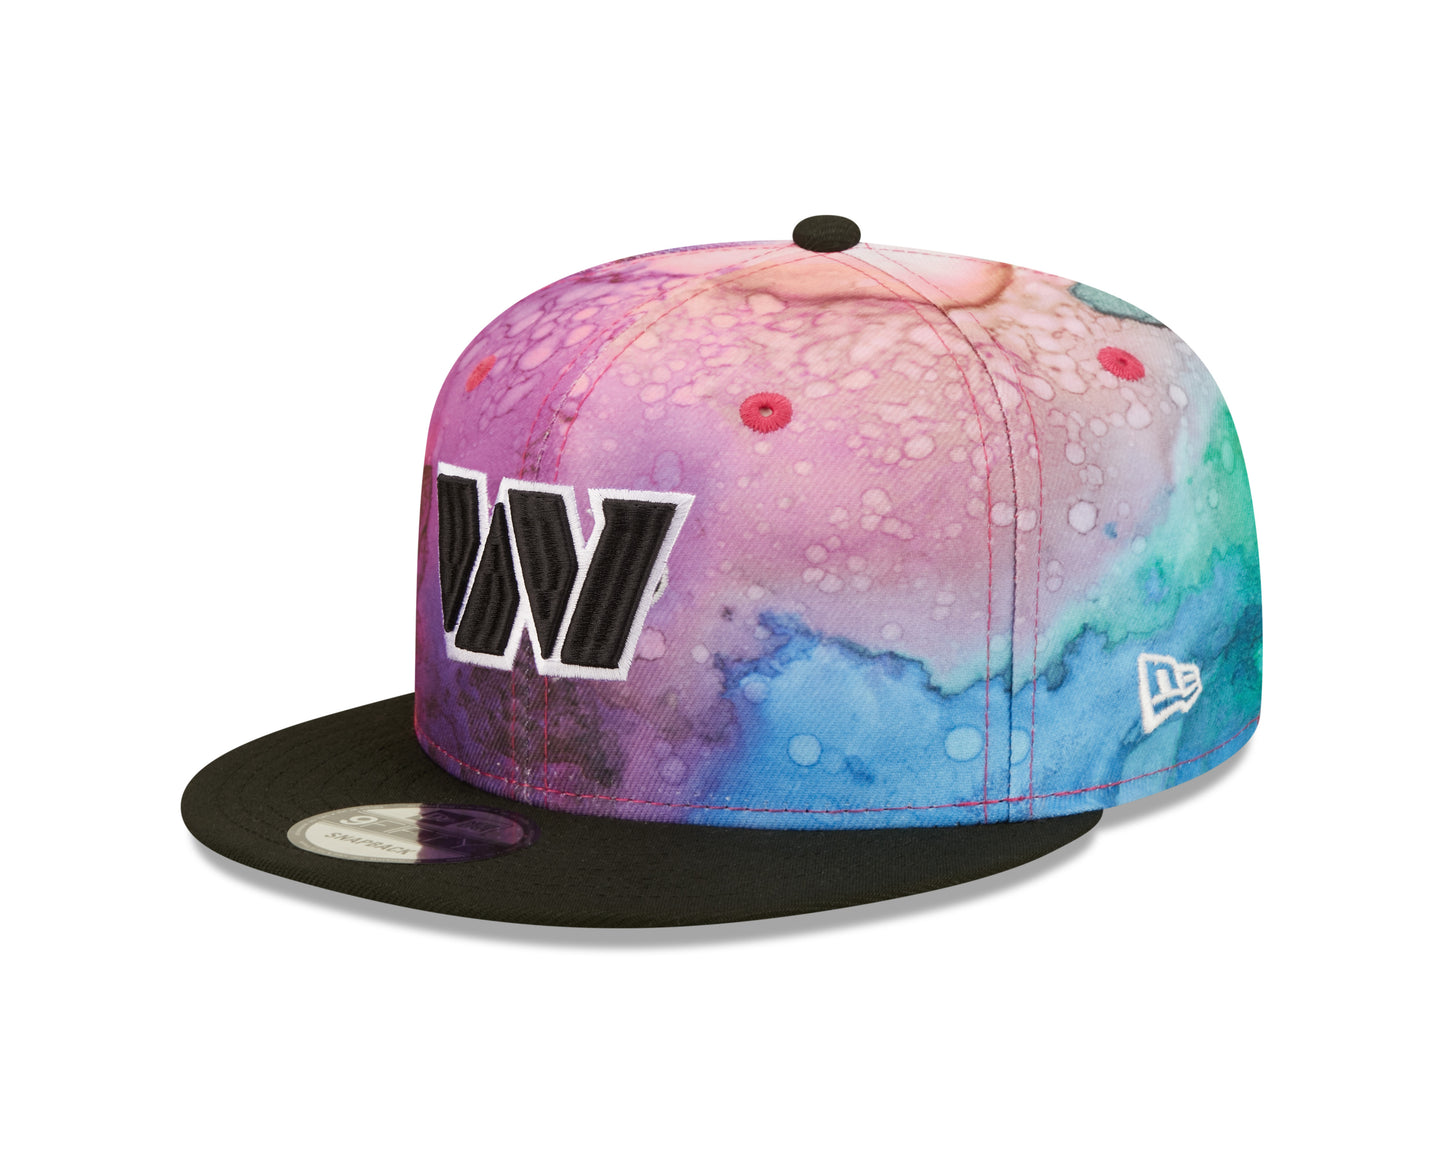 Washington Commanders New Era Sideline Crucial Catch 9Fifty Hat- Ink Pink